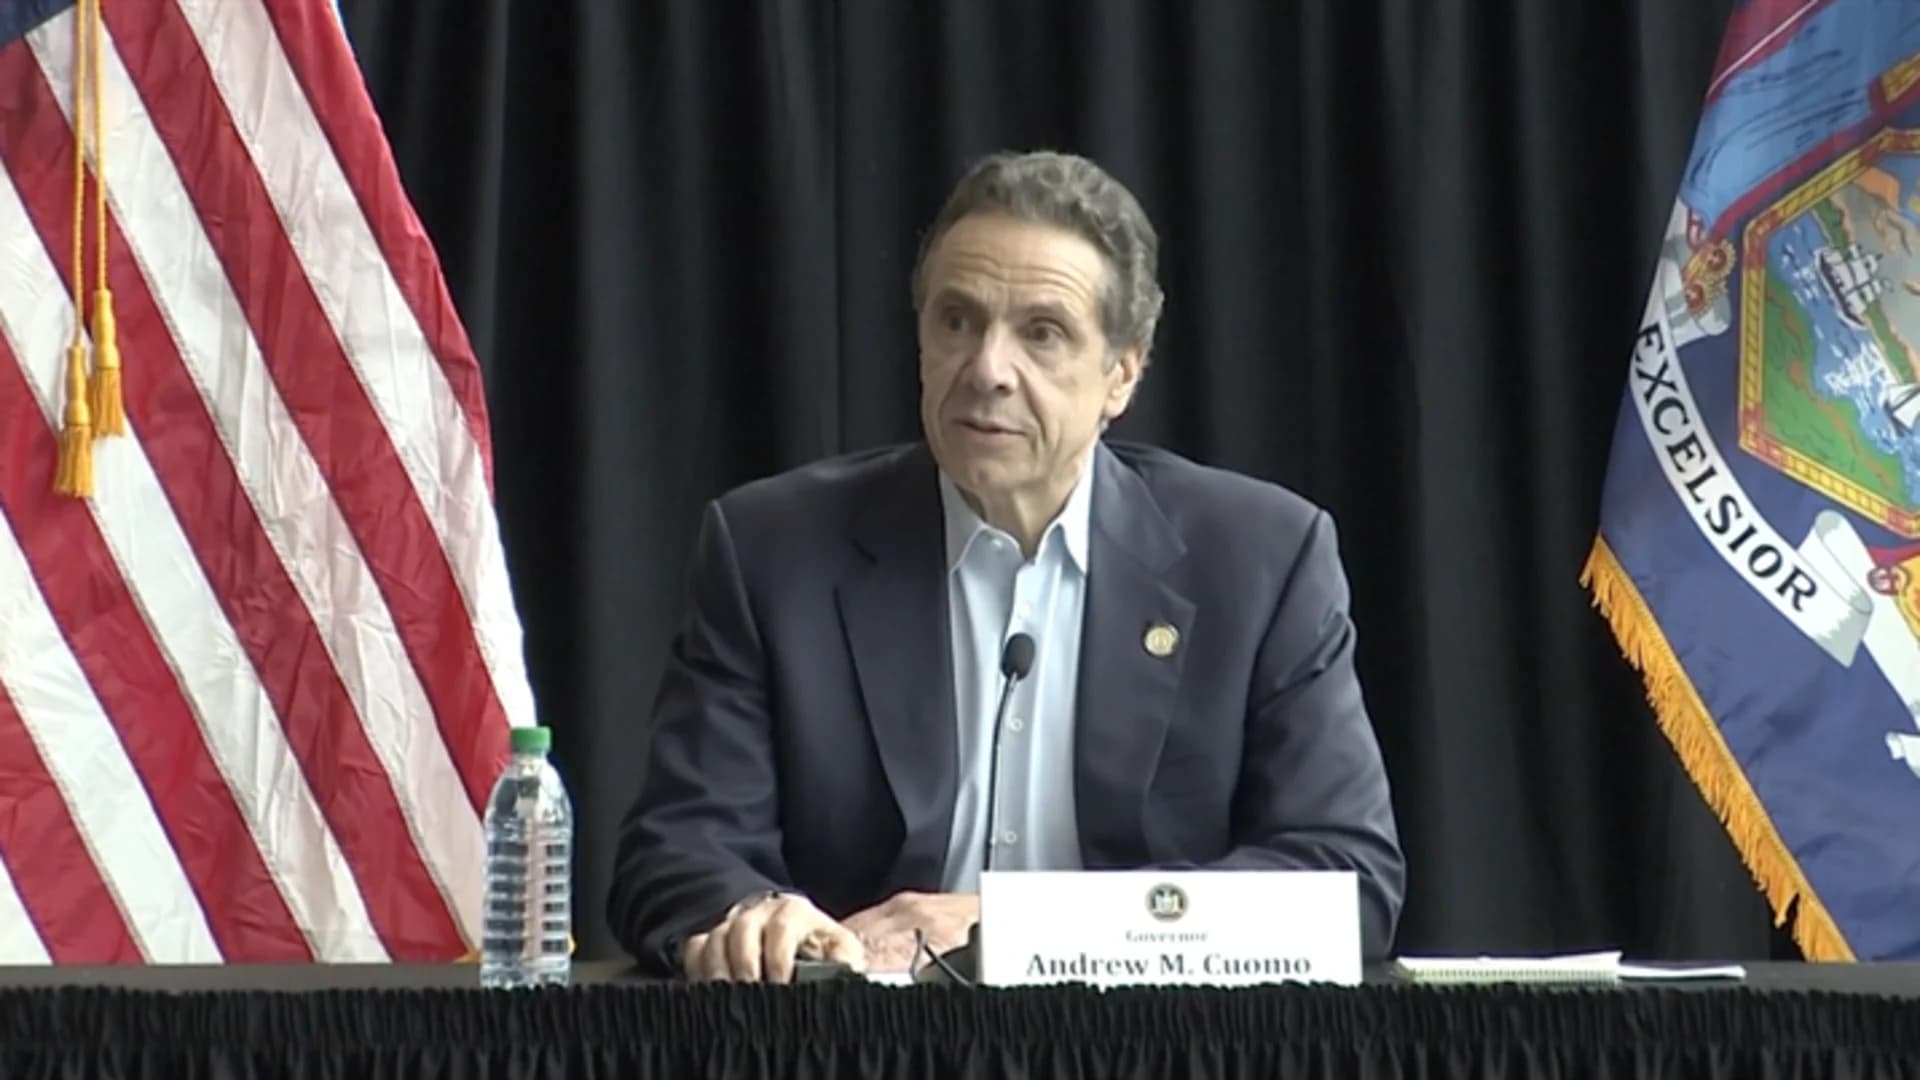 'There is no American who is immune to this virus' - Cuomo says NY deaths up to 1,218